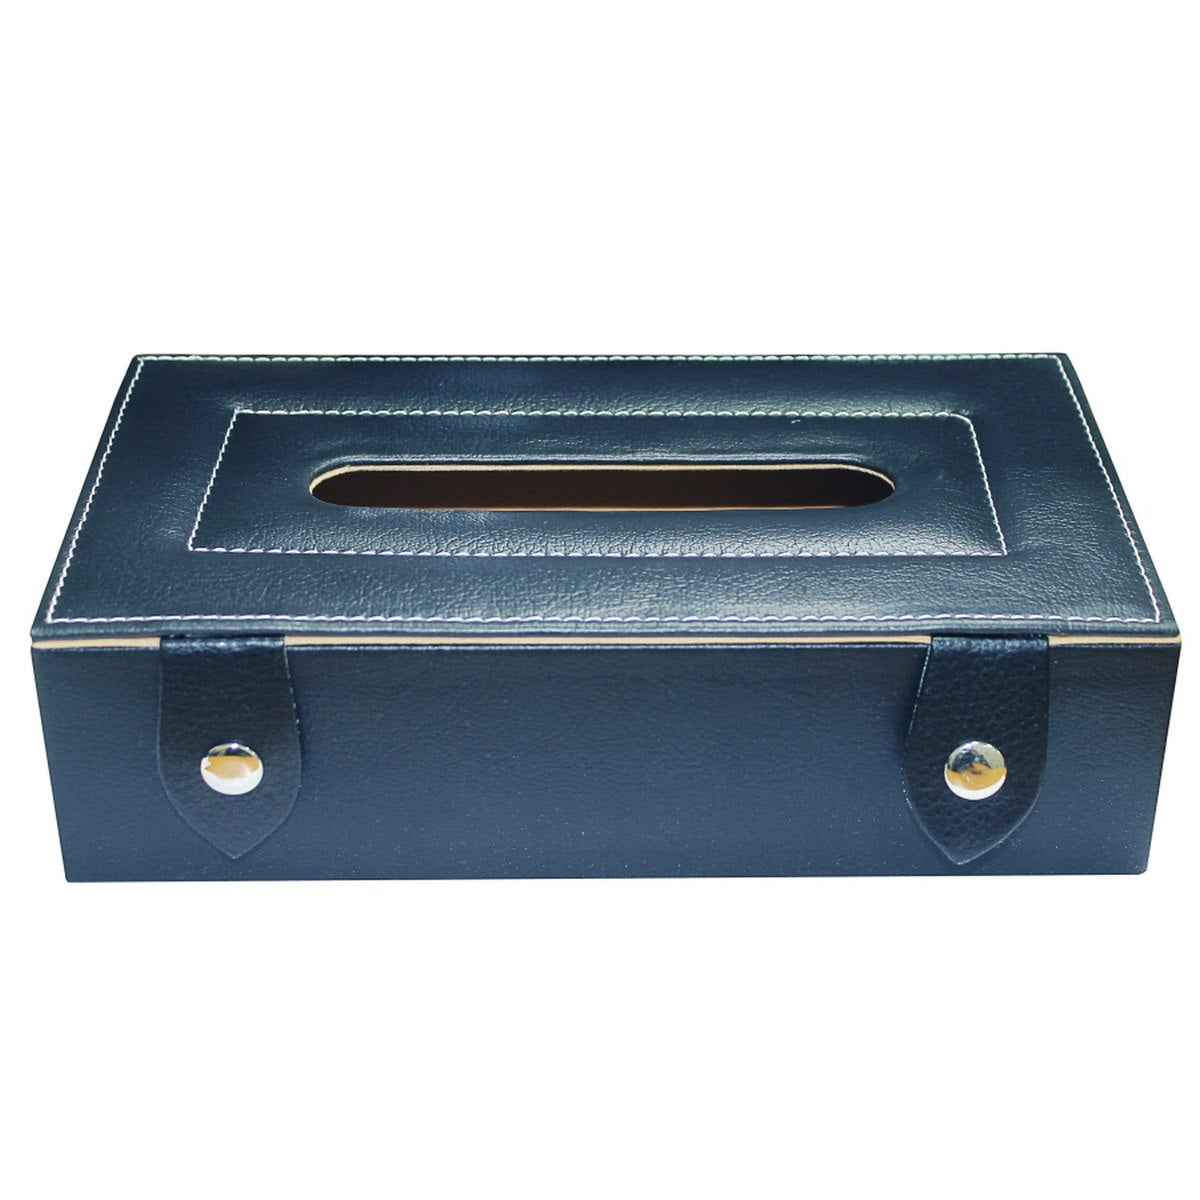 Black Leather Tissue Paper Holder - For Office Use, Personal Use, Corporate Gifting, Return Gift JATBLS